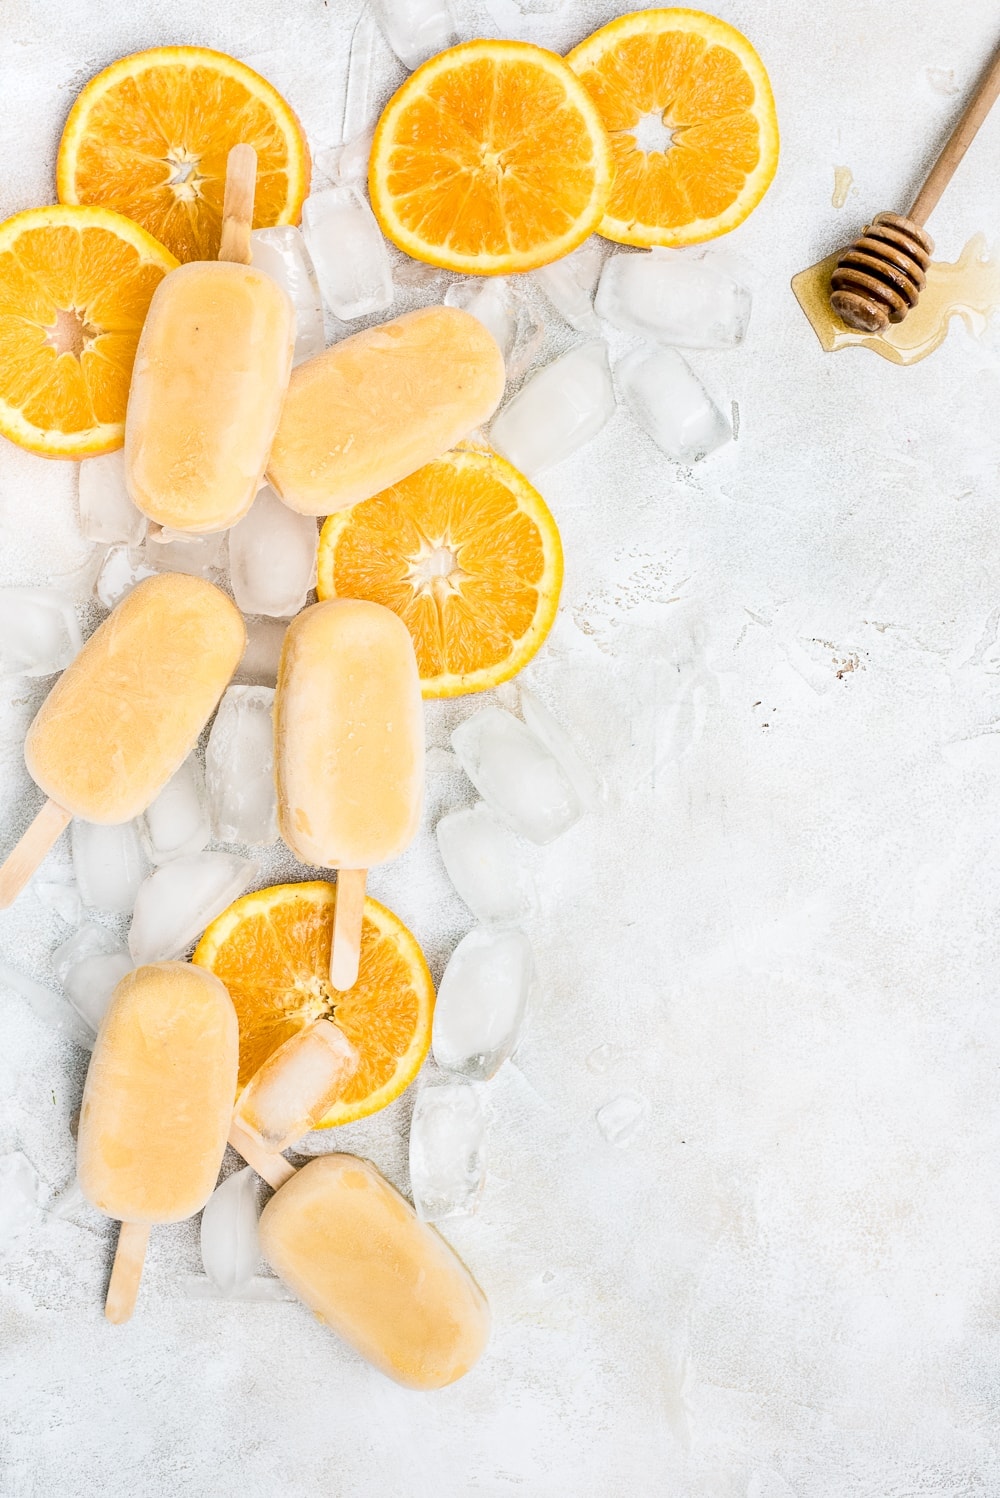 orange creamsicle popsicles scattered on table with ice and oranges